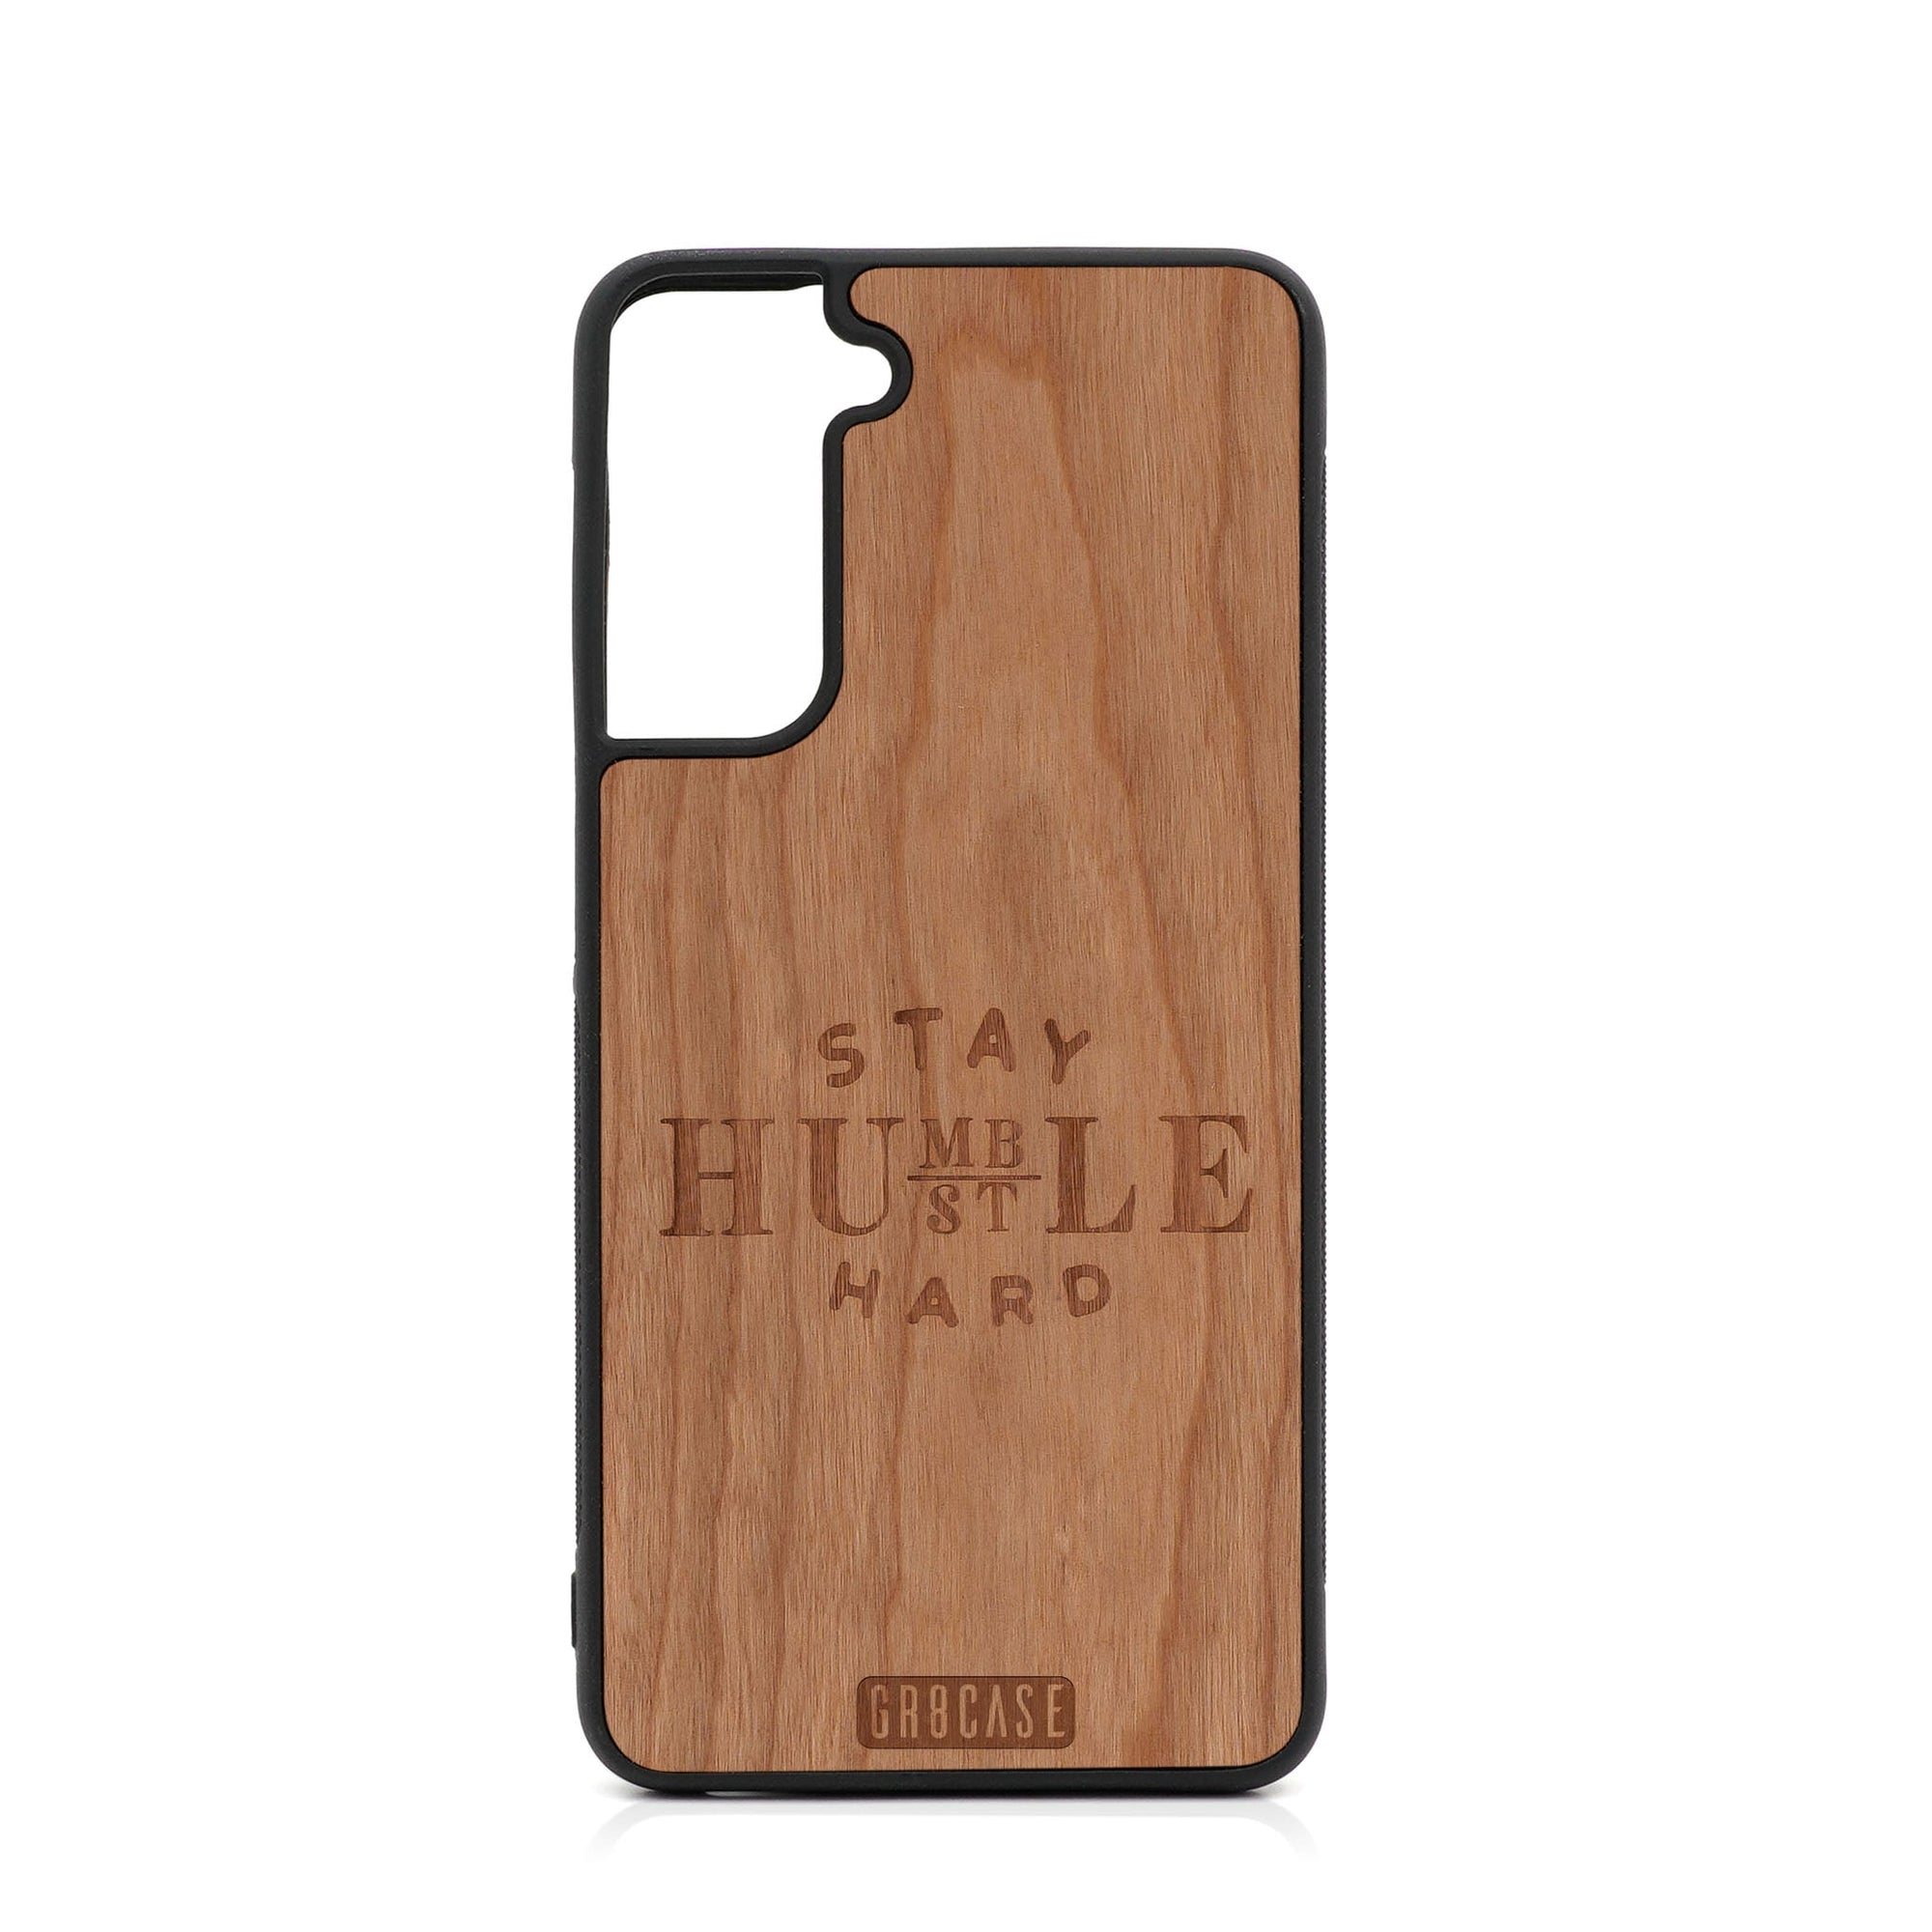 Stay Humble Hustle Hard Design Wood Case For Samsung Galaxy S21 FE 5G